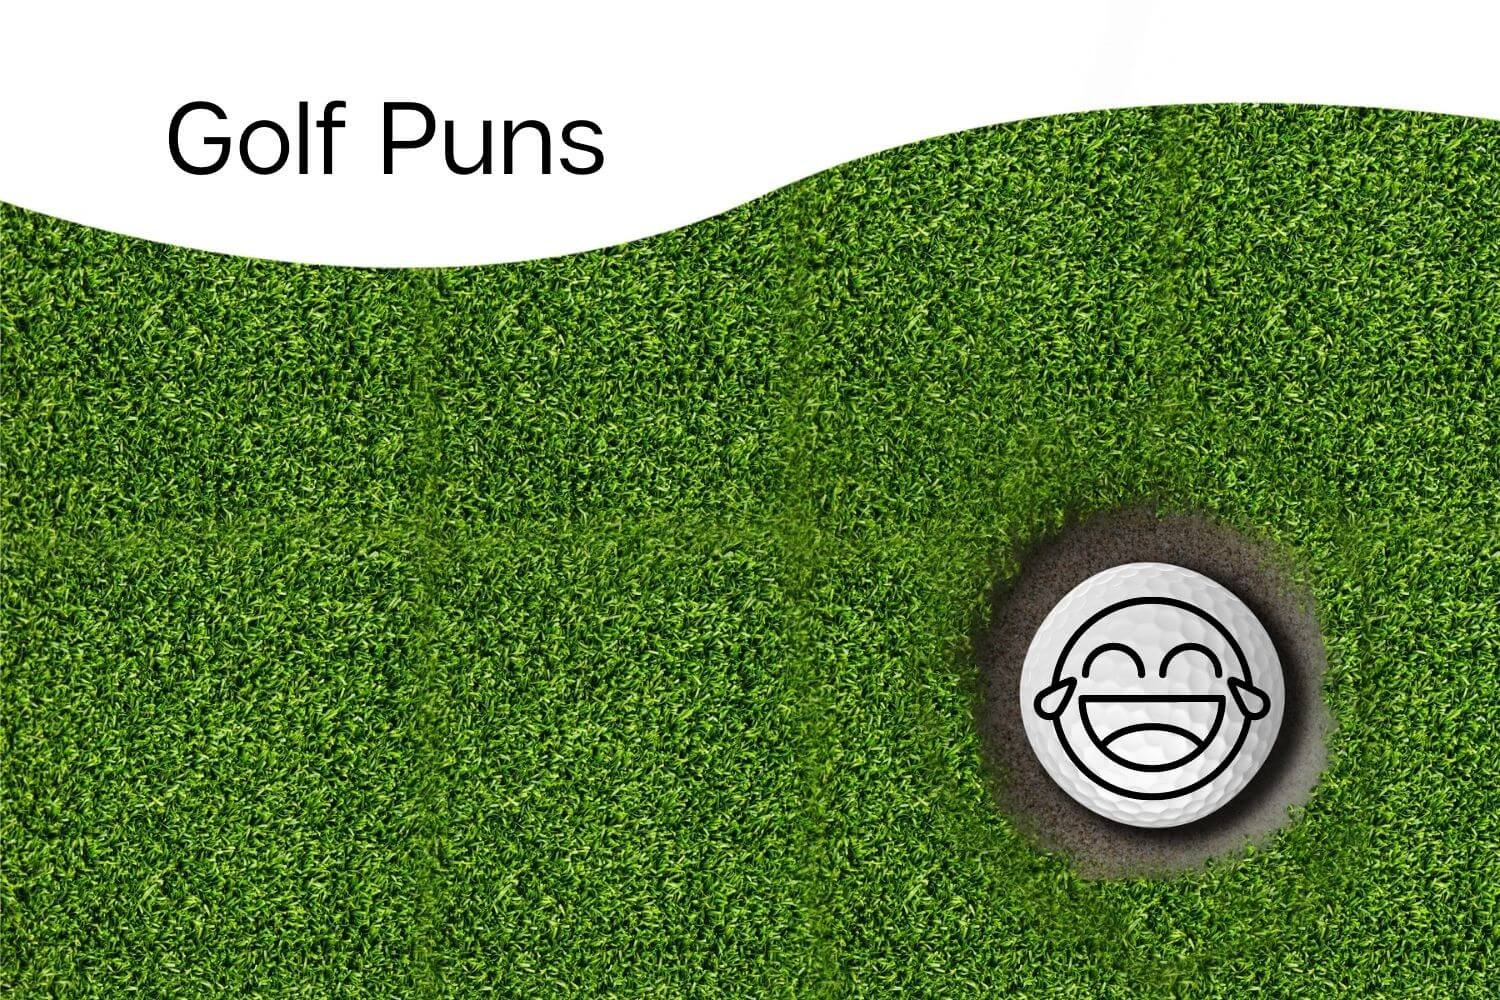 golf puns text and golf ball with laugh emoji